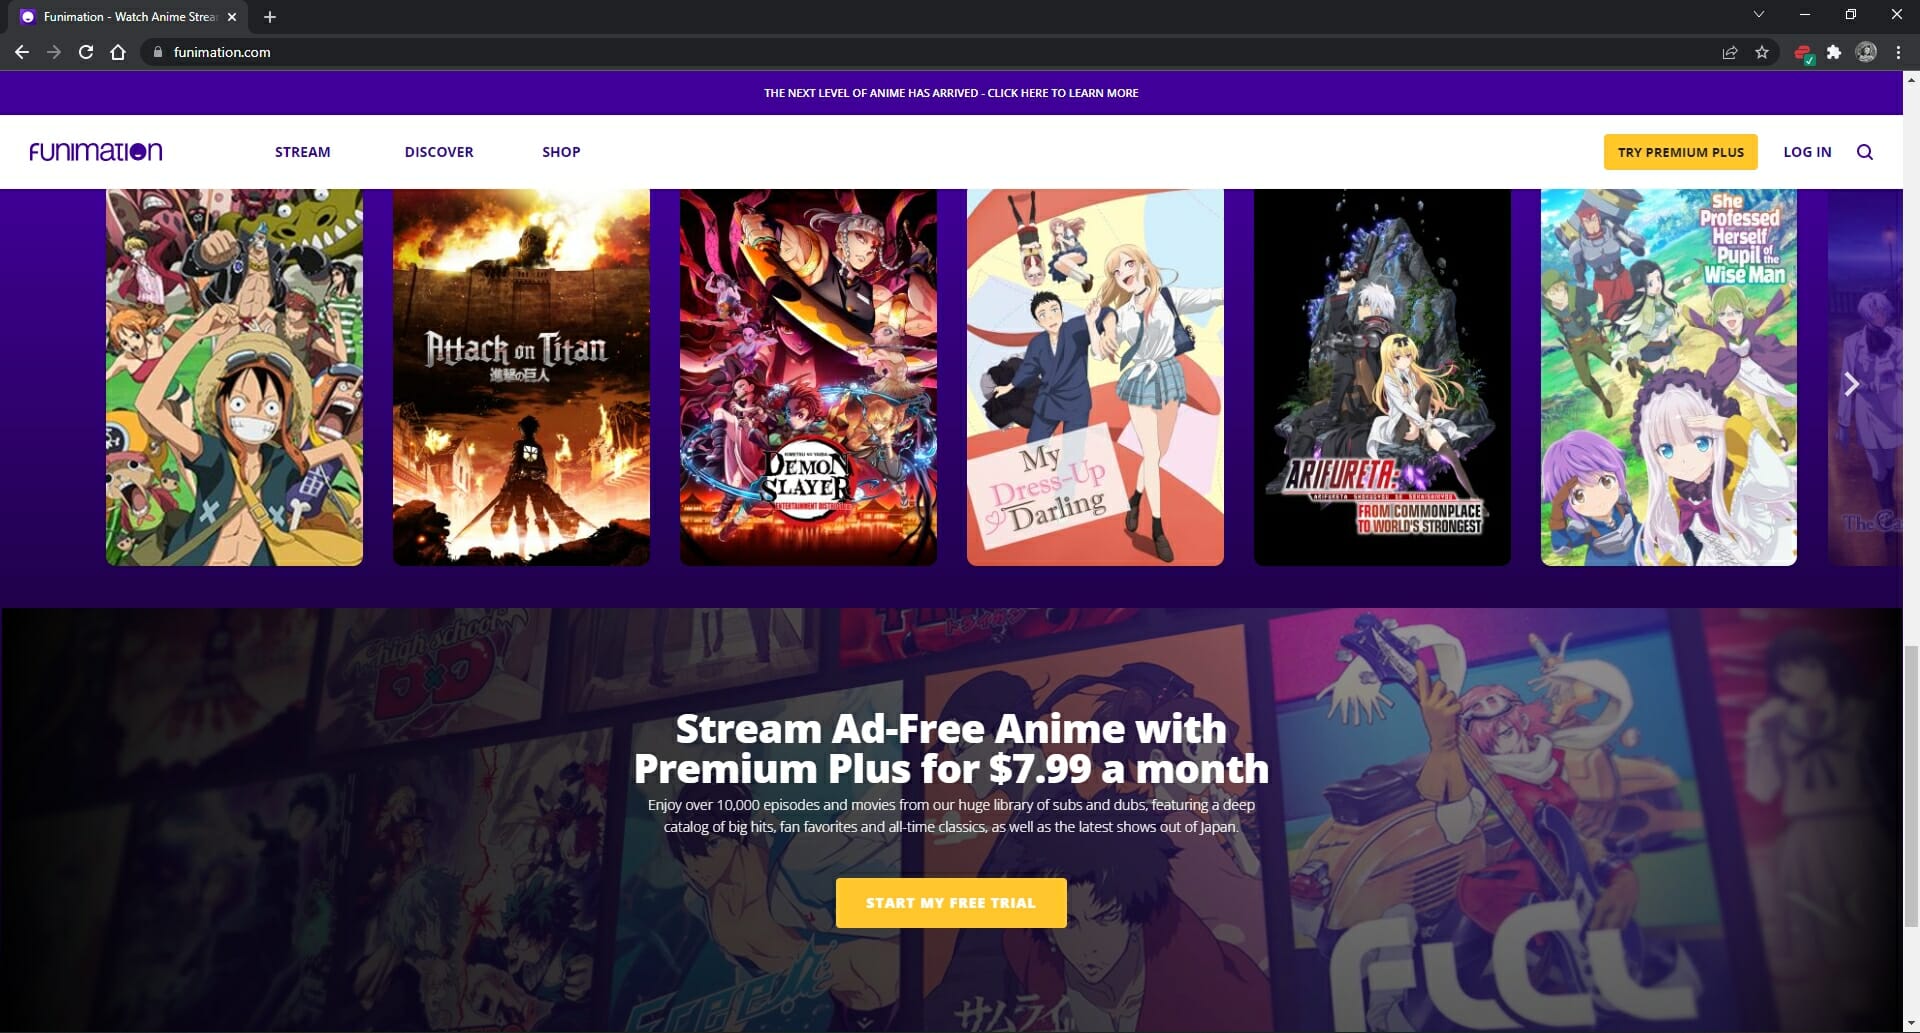 Google Chrome for streaming anime on Funimation.